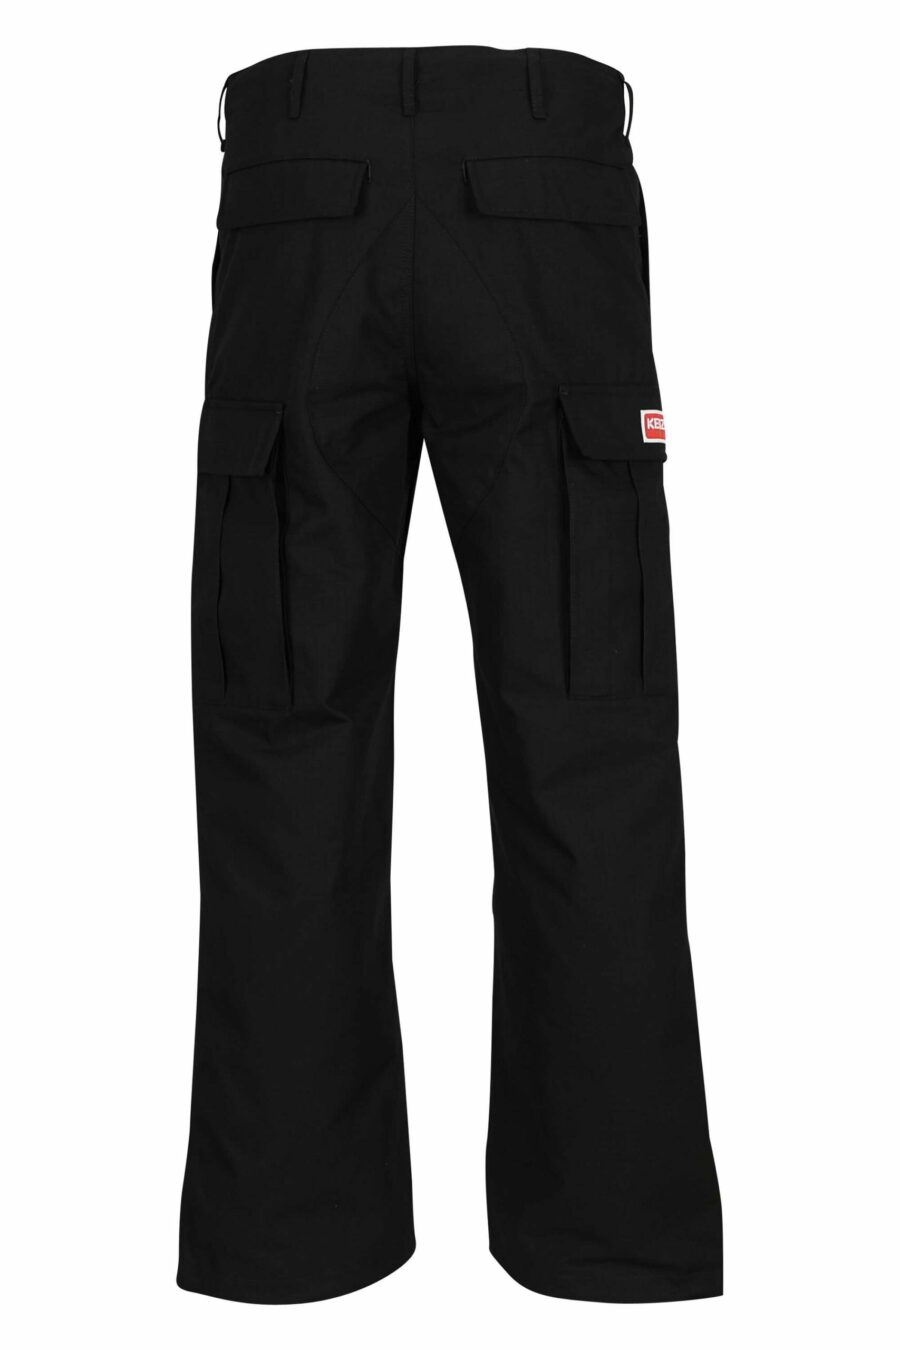 Black cargo trousers with "boke flower" logo - 3612230618855 2 scaled